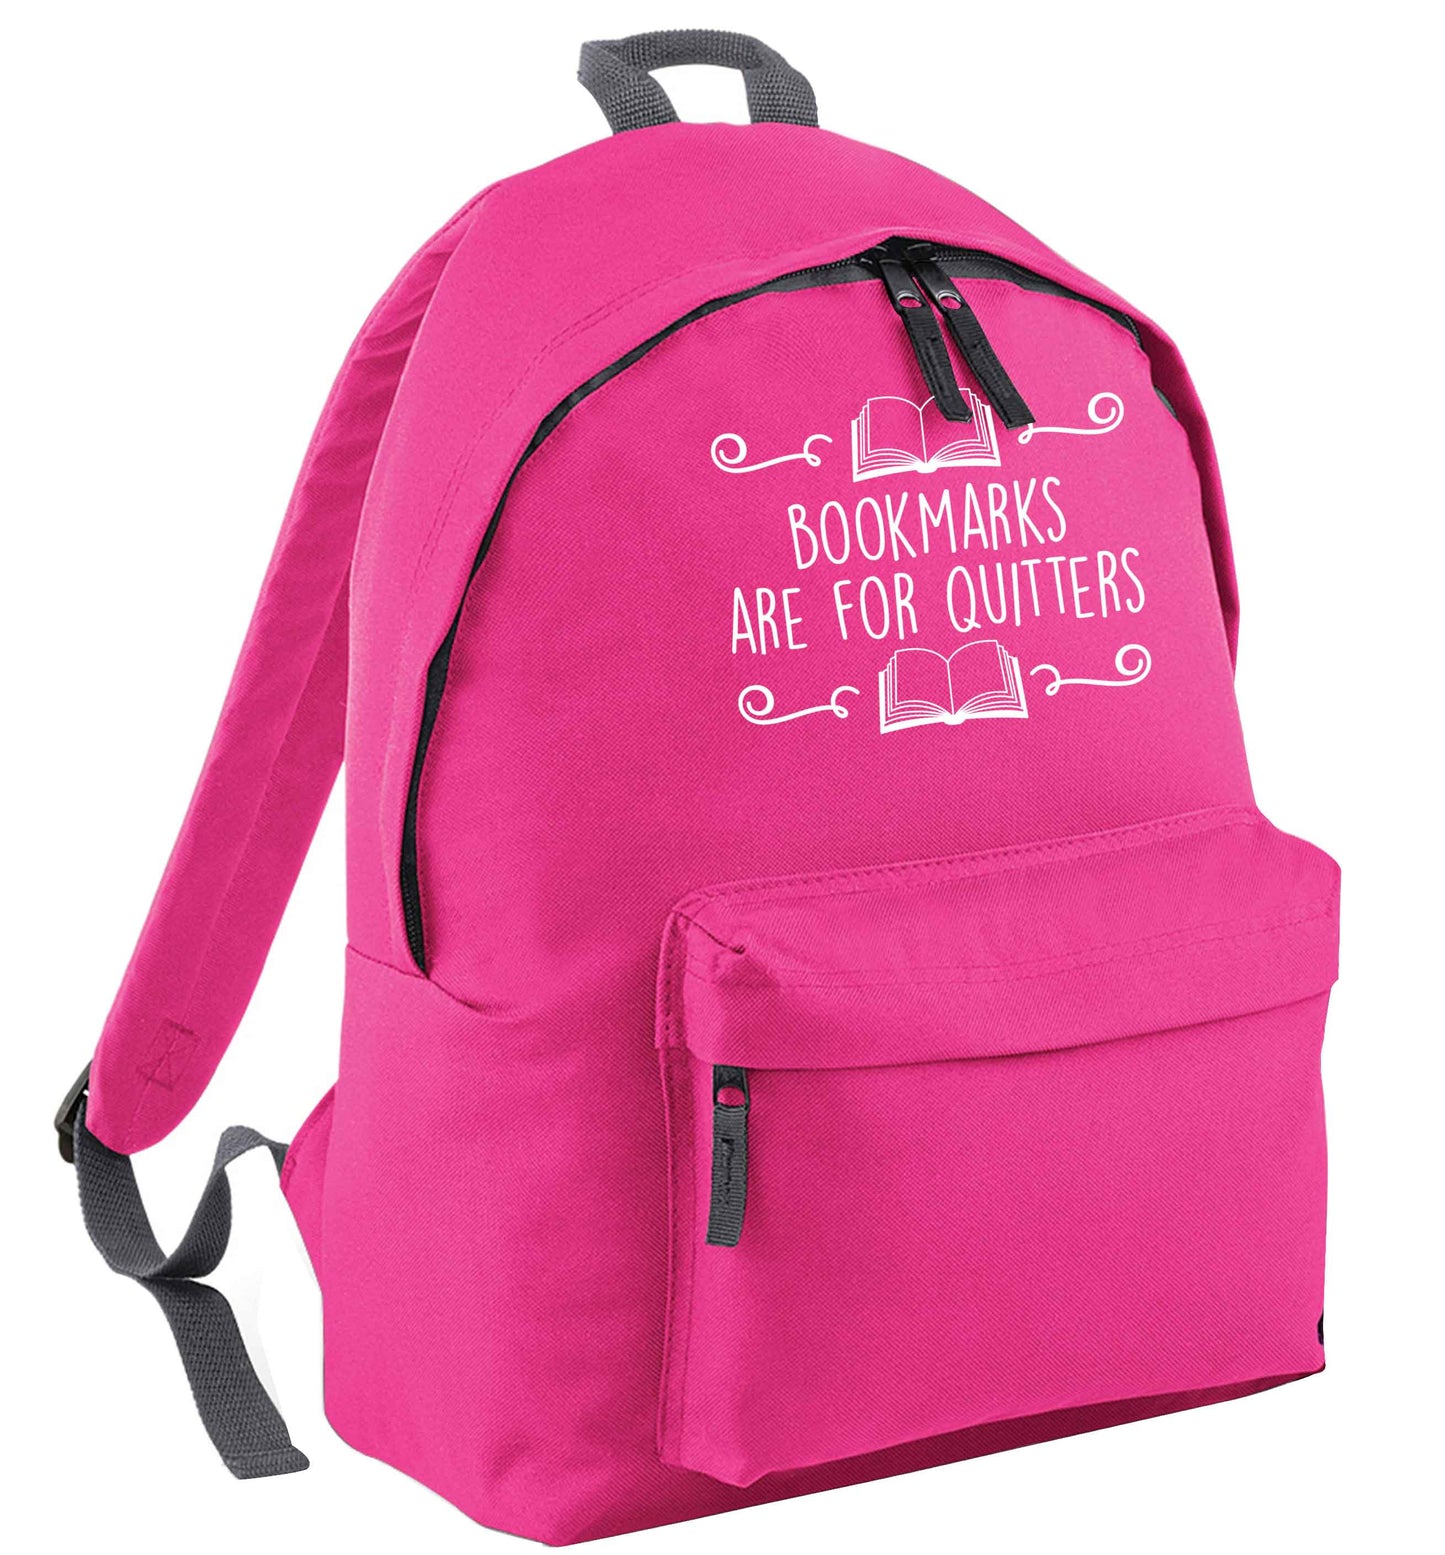 Bookmarks are for quitters pink adults backpack